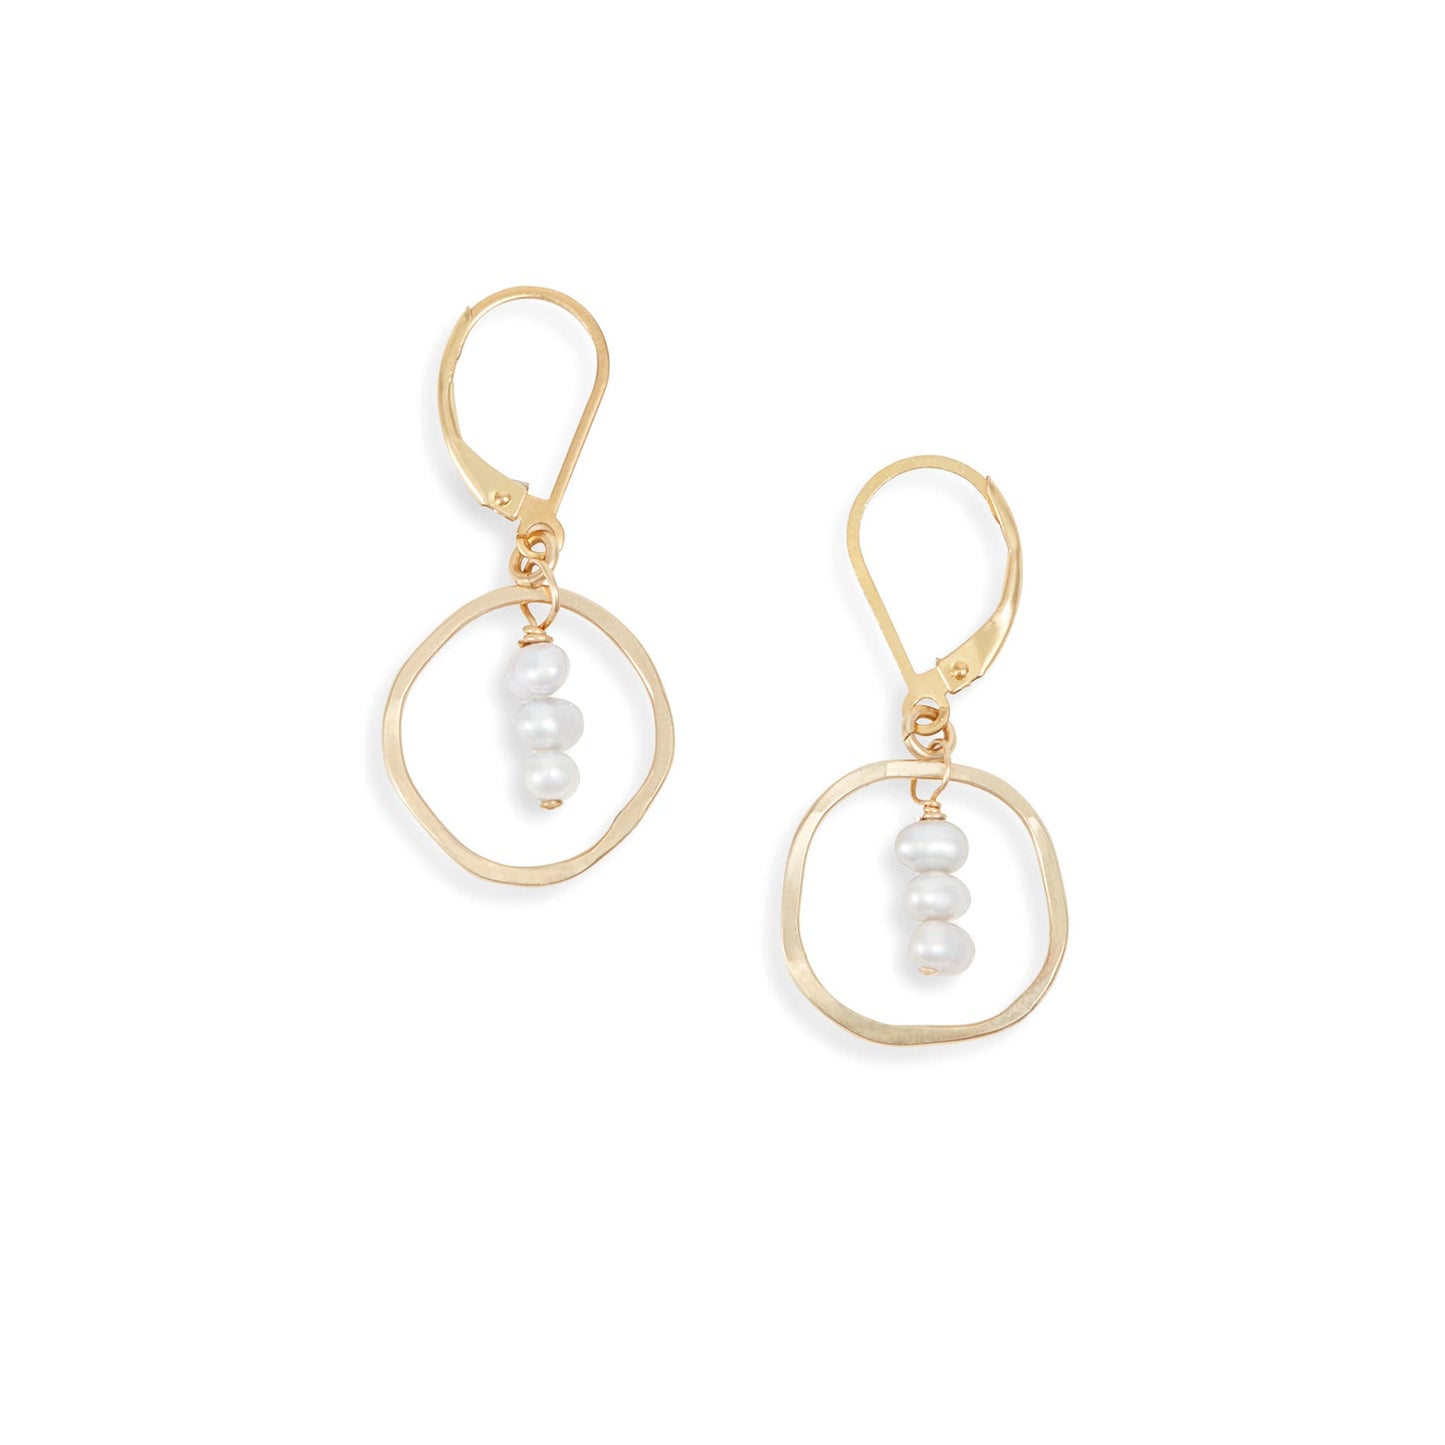 Treble Dainty Three Pearl Circle Earrings - gold filled